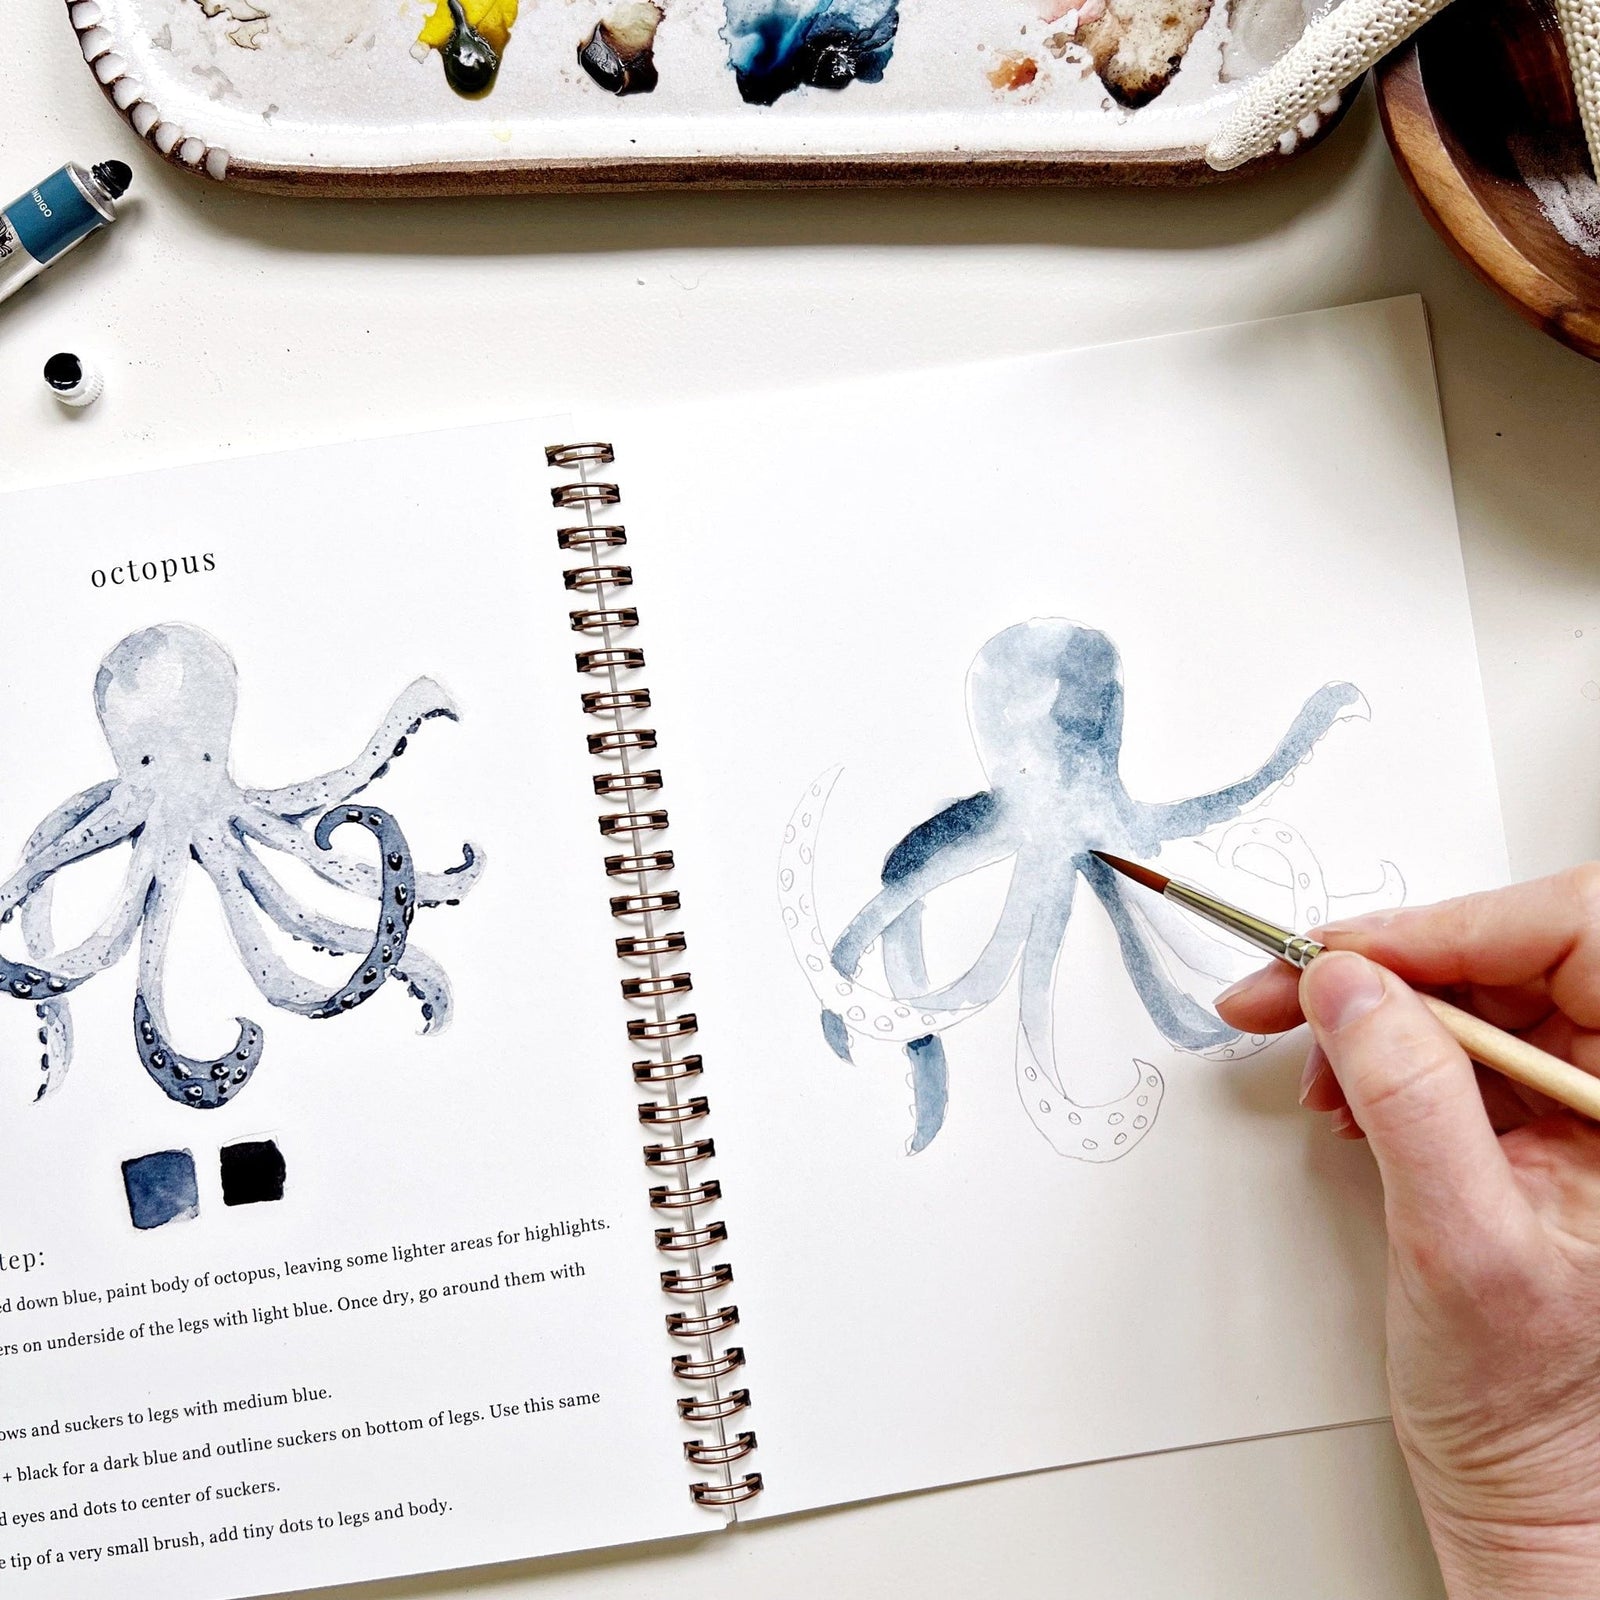 Emily Lex Studio - Gathering inspiration for a seaside watercolor